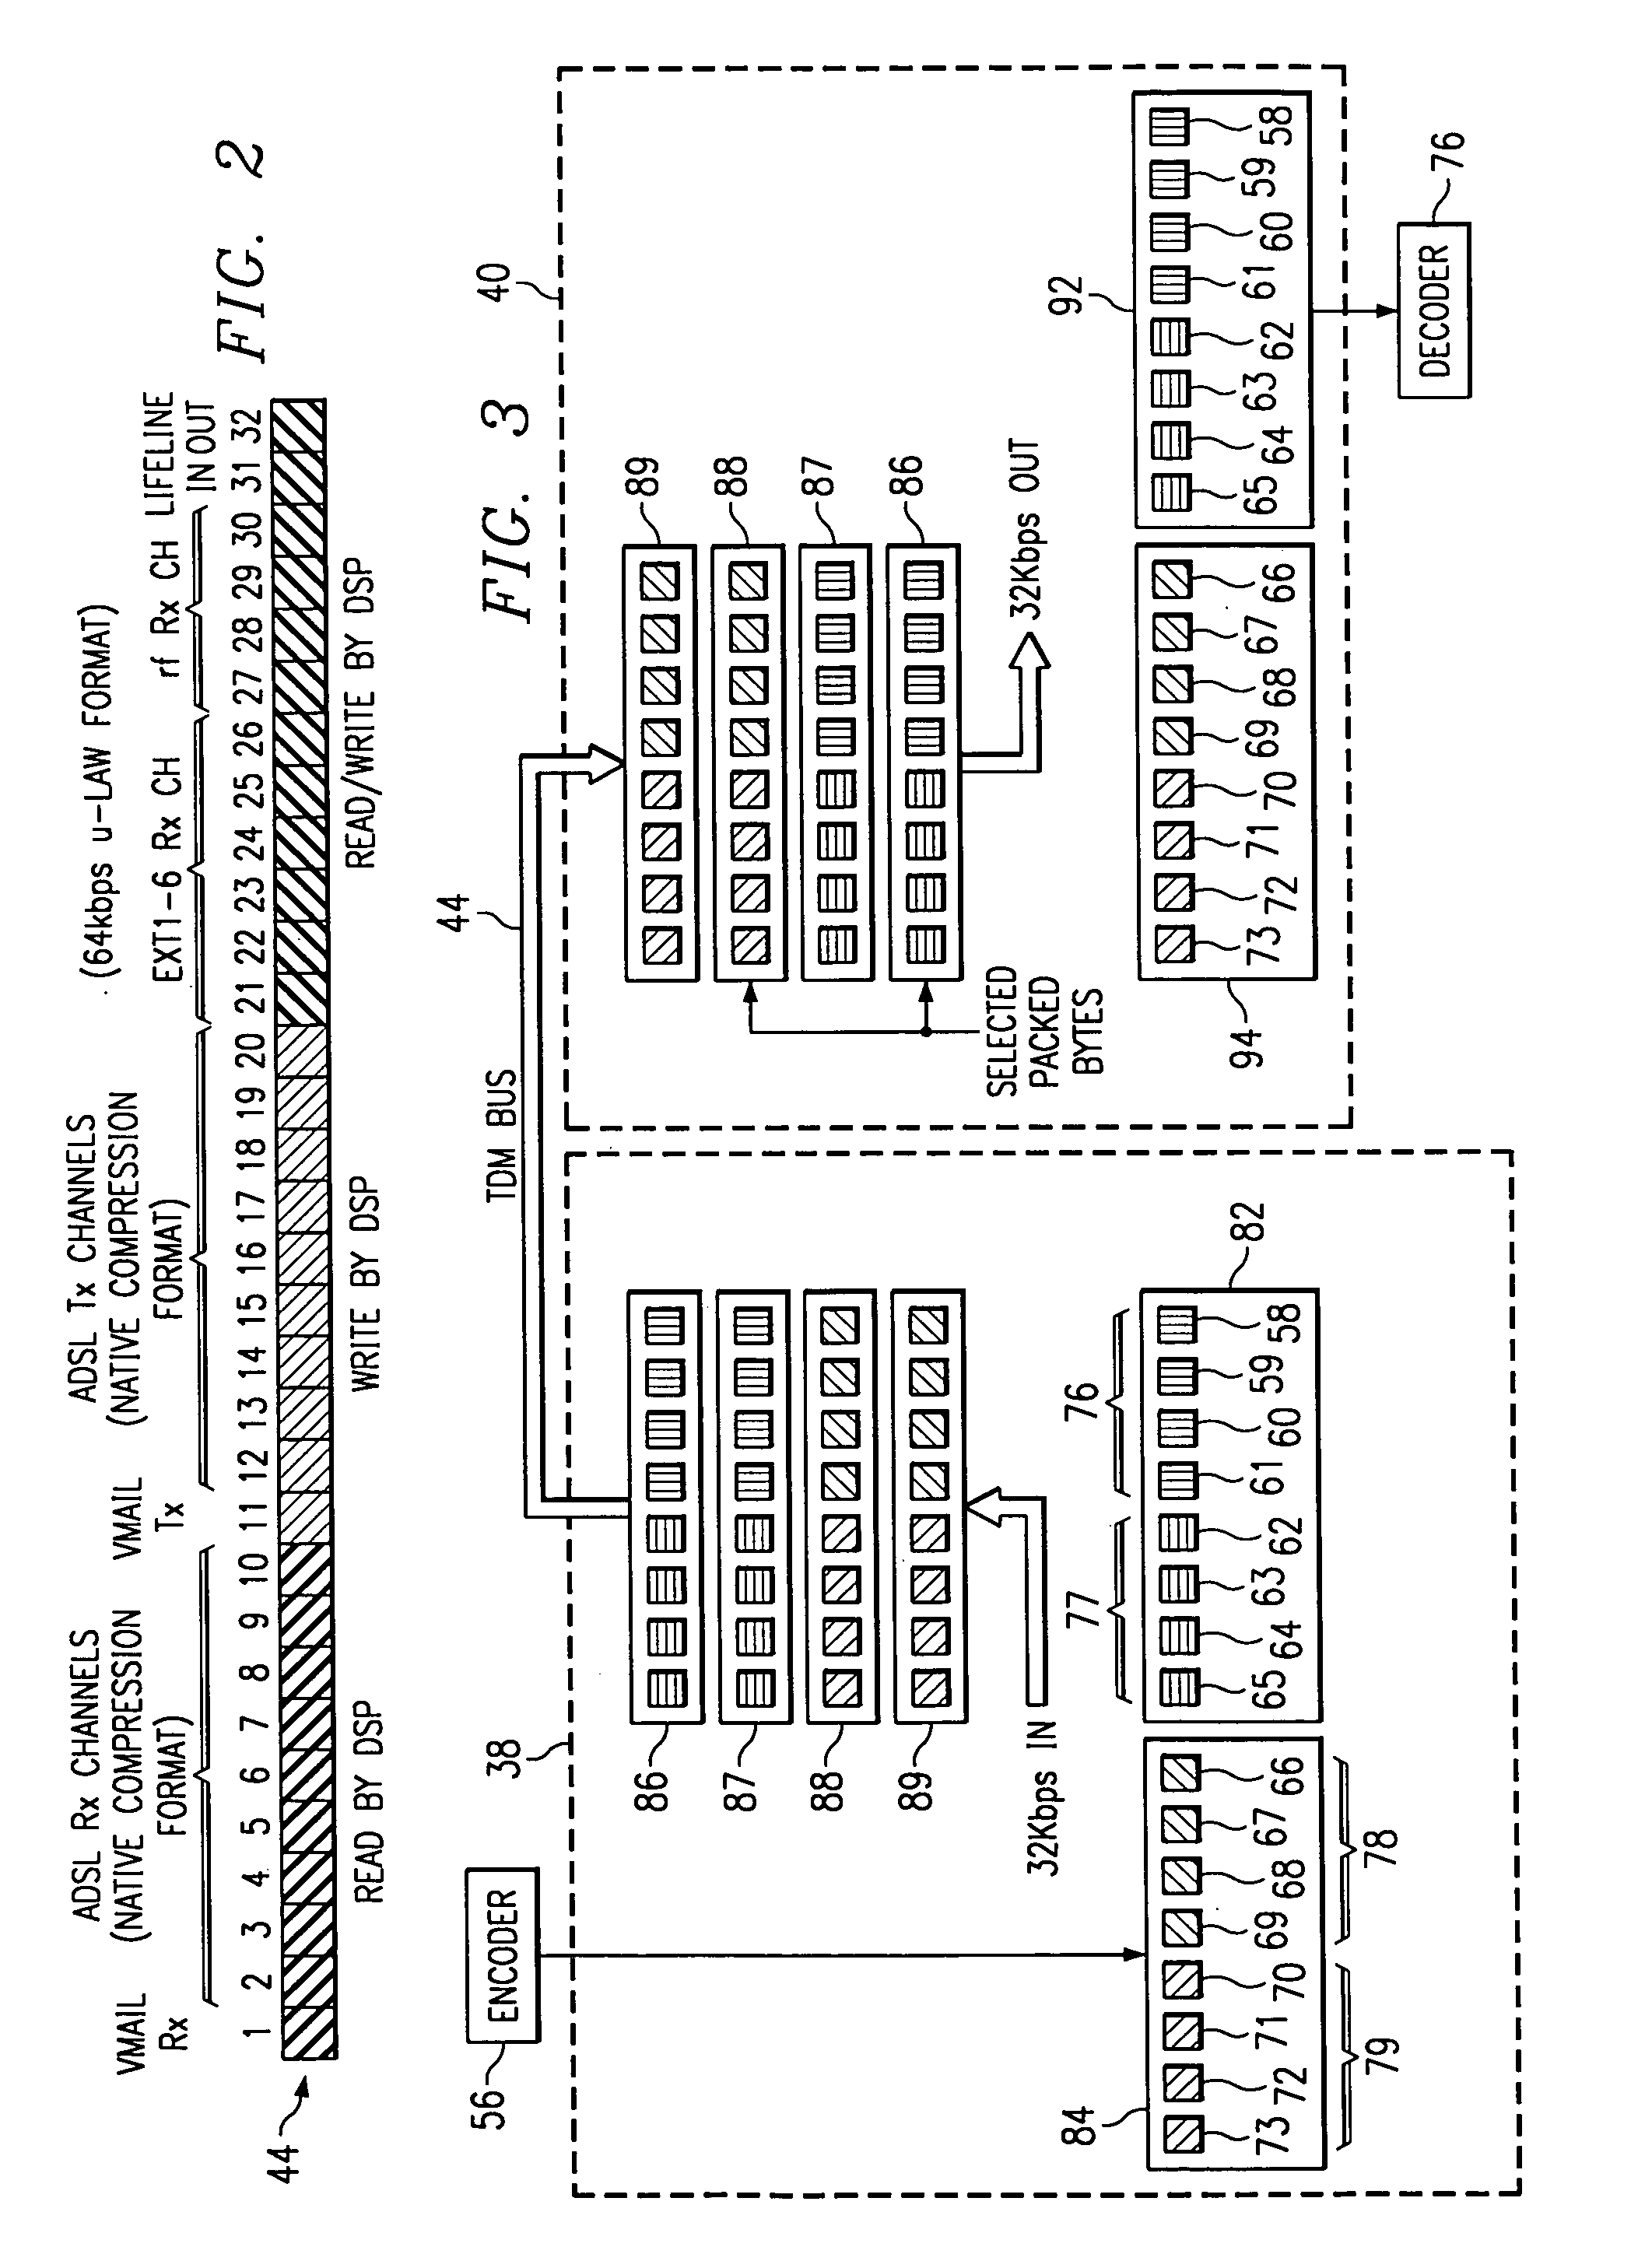 System and method for transmission of digitized audio samples